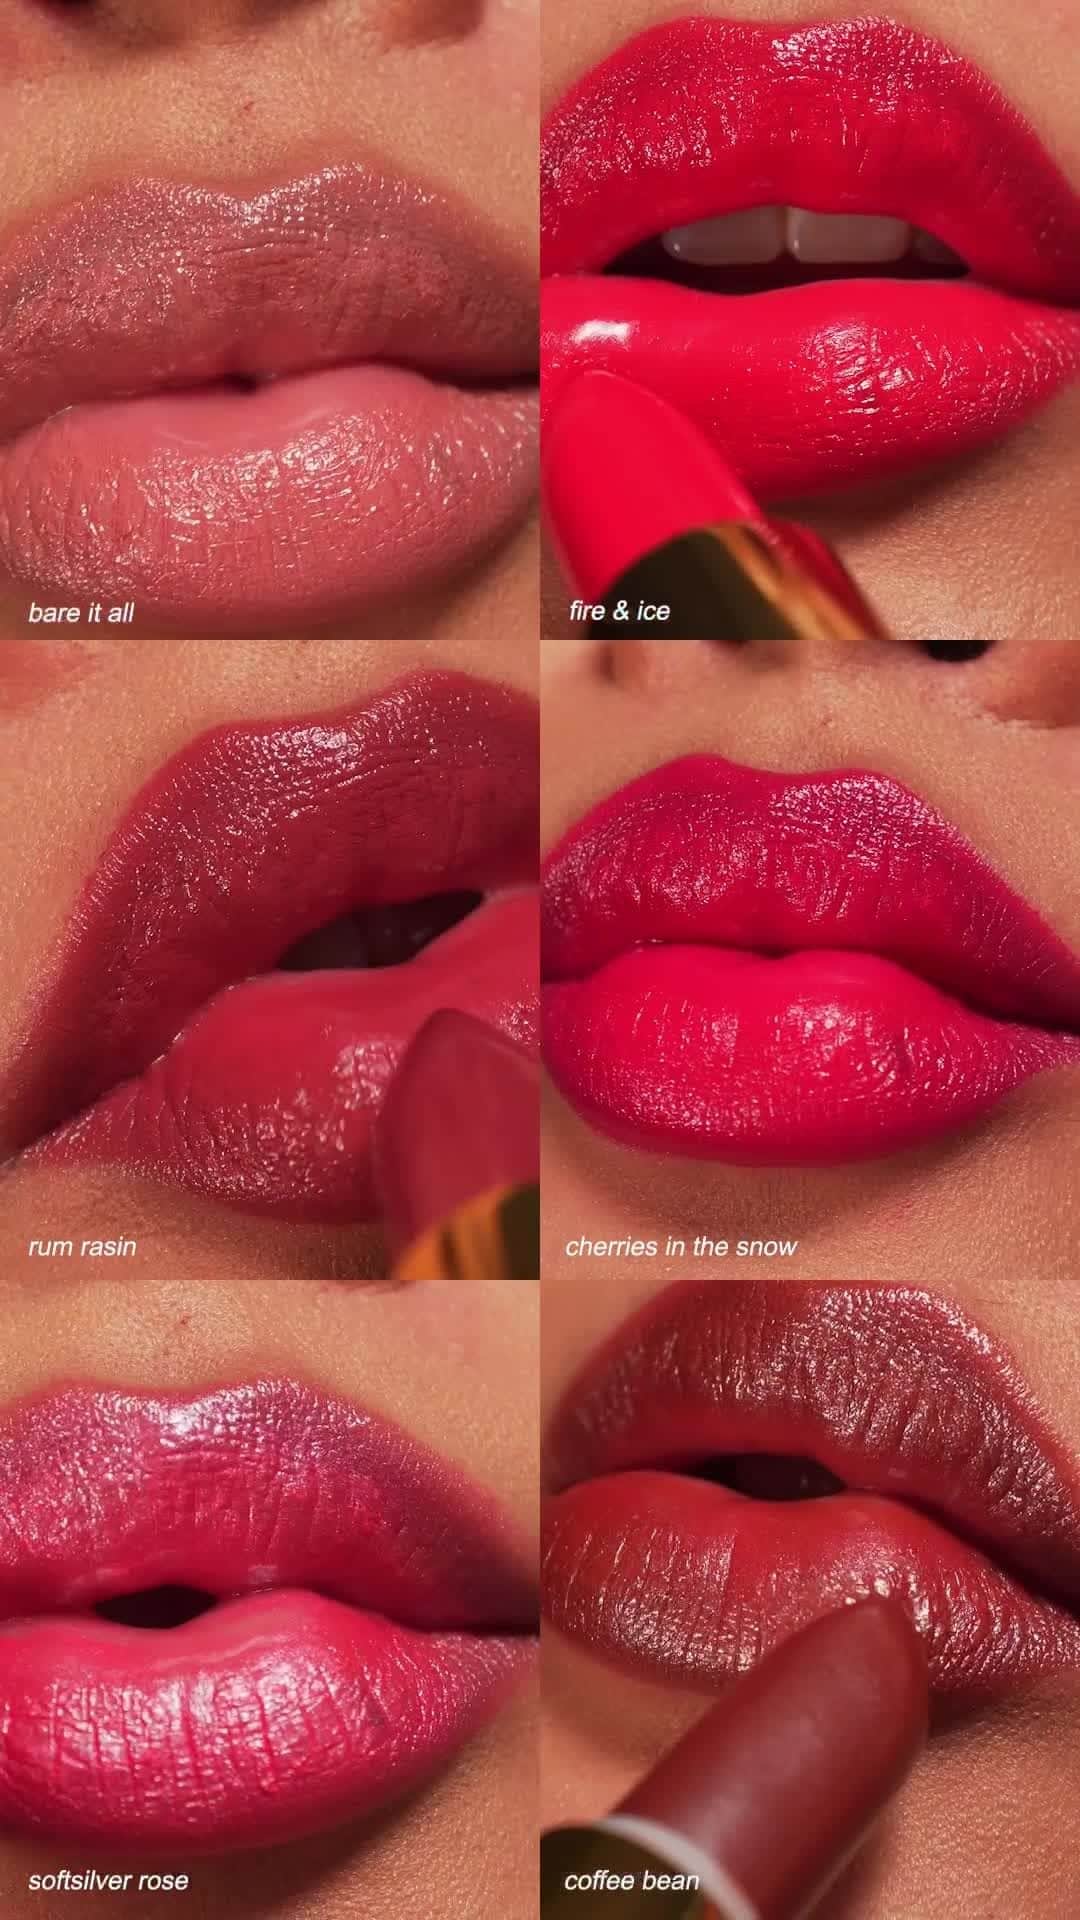 Revlonのインスタグラム：「@cinesupreme = serious pout goals in #SuperLustrous 💋  Which shade are you grabbing? Drop an emoji in the comments!  👄 Bare It All  🔥 Fire & Ice 🤎 Rum Raisin 🍒 Cherries In The Snow 🌹 Softsliver Rose ☕️ Coffee Bean」